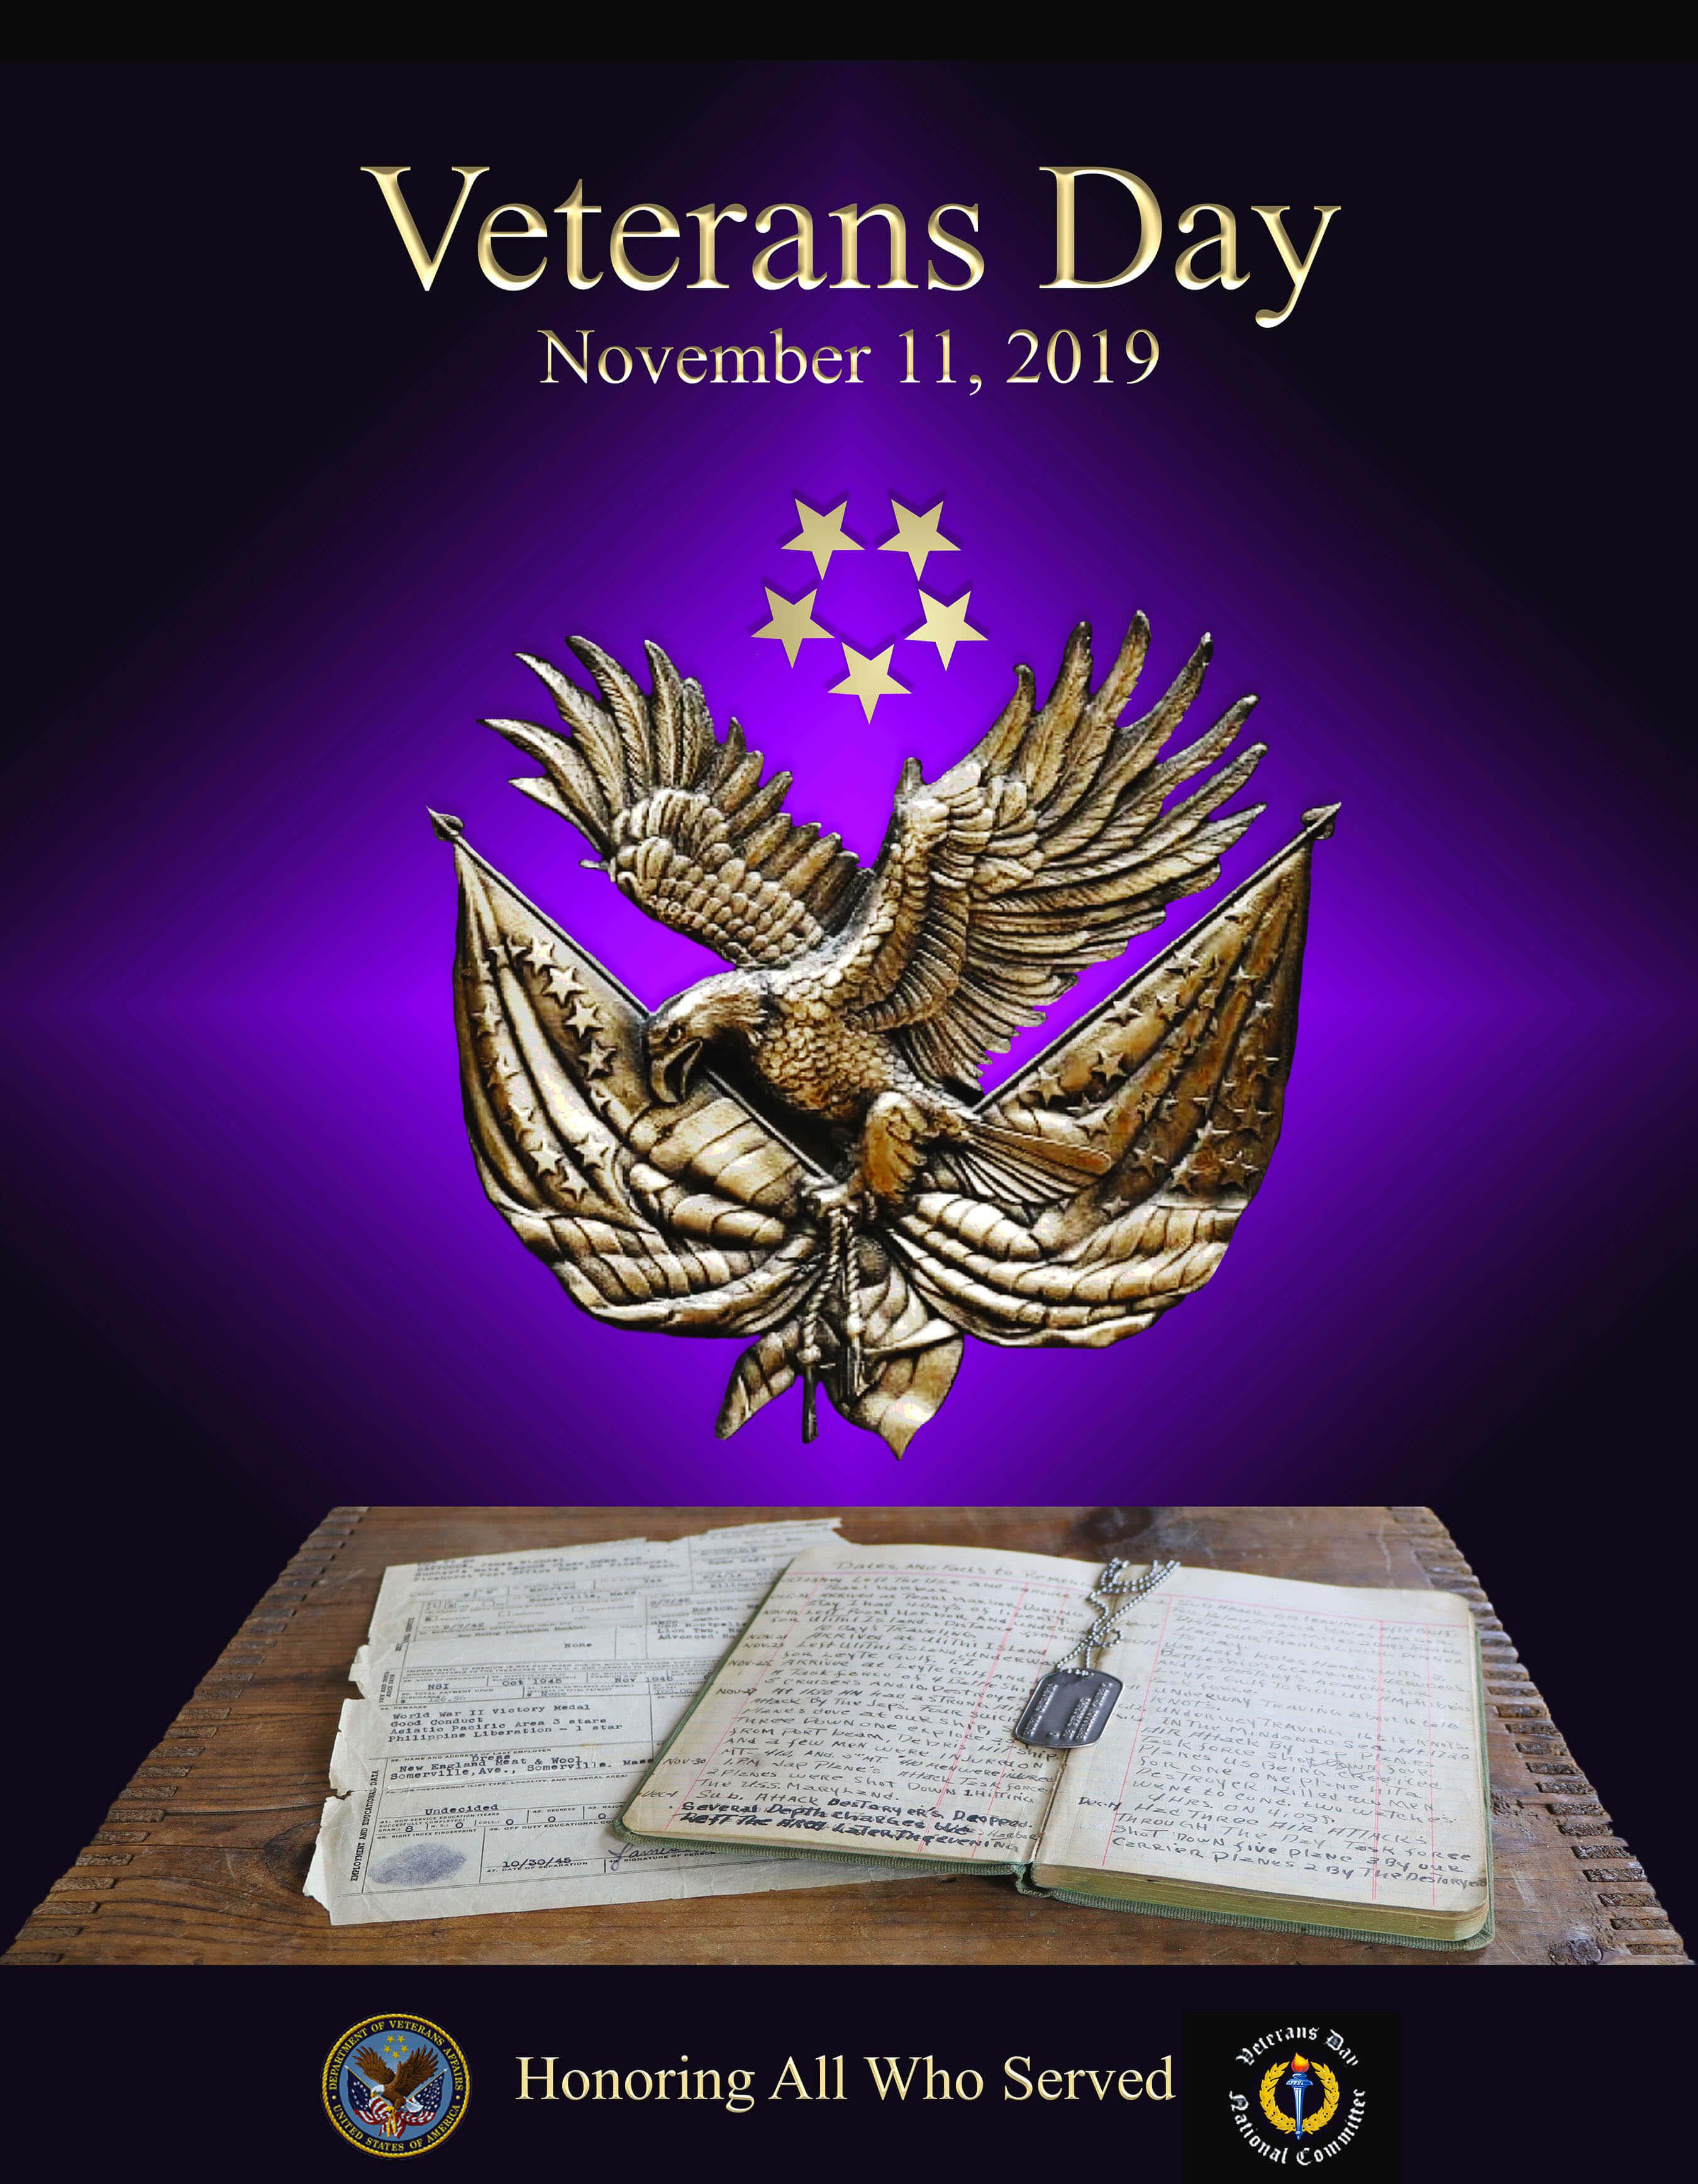 Happy Veterans Day 2019. Quotes. Image. Facts. History